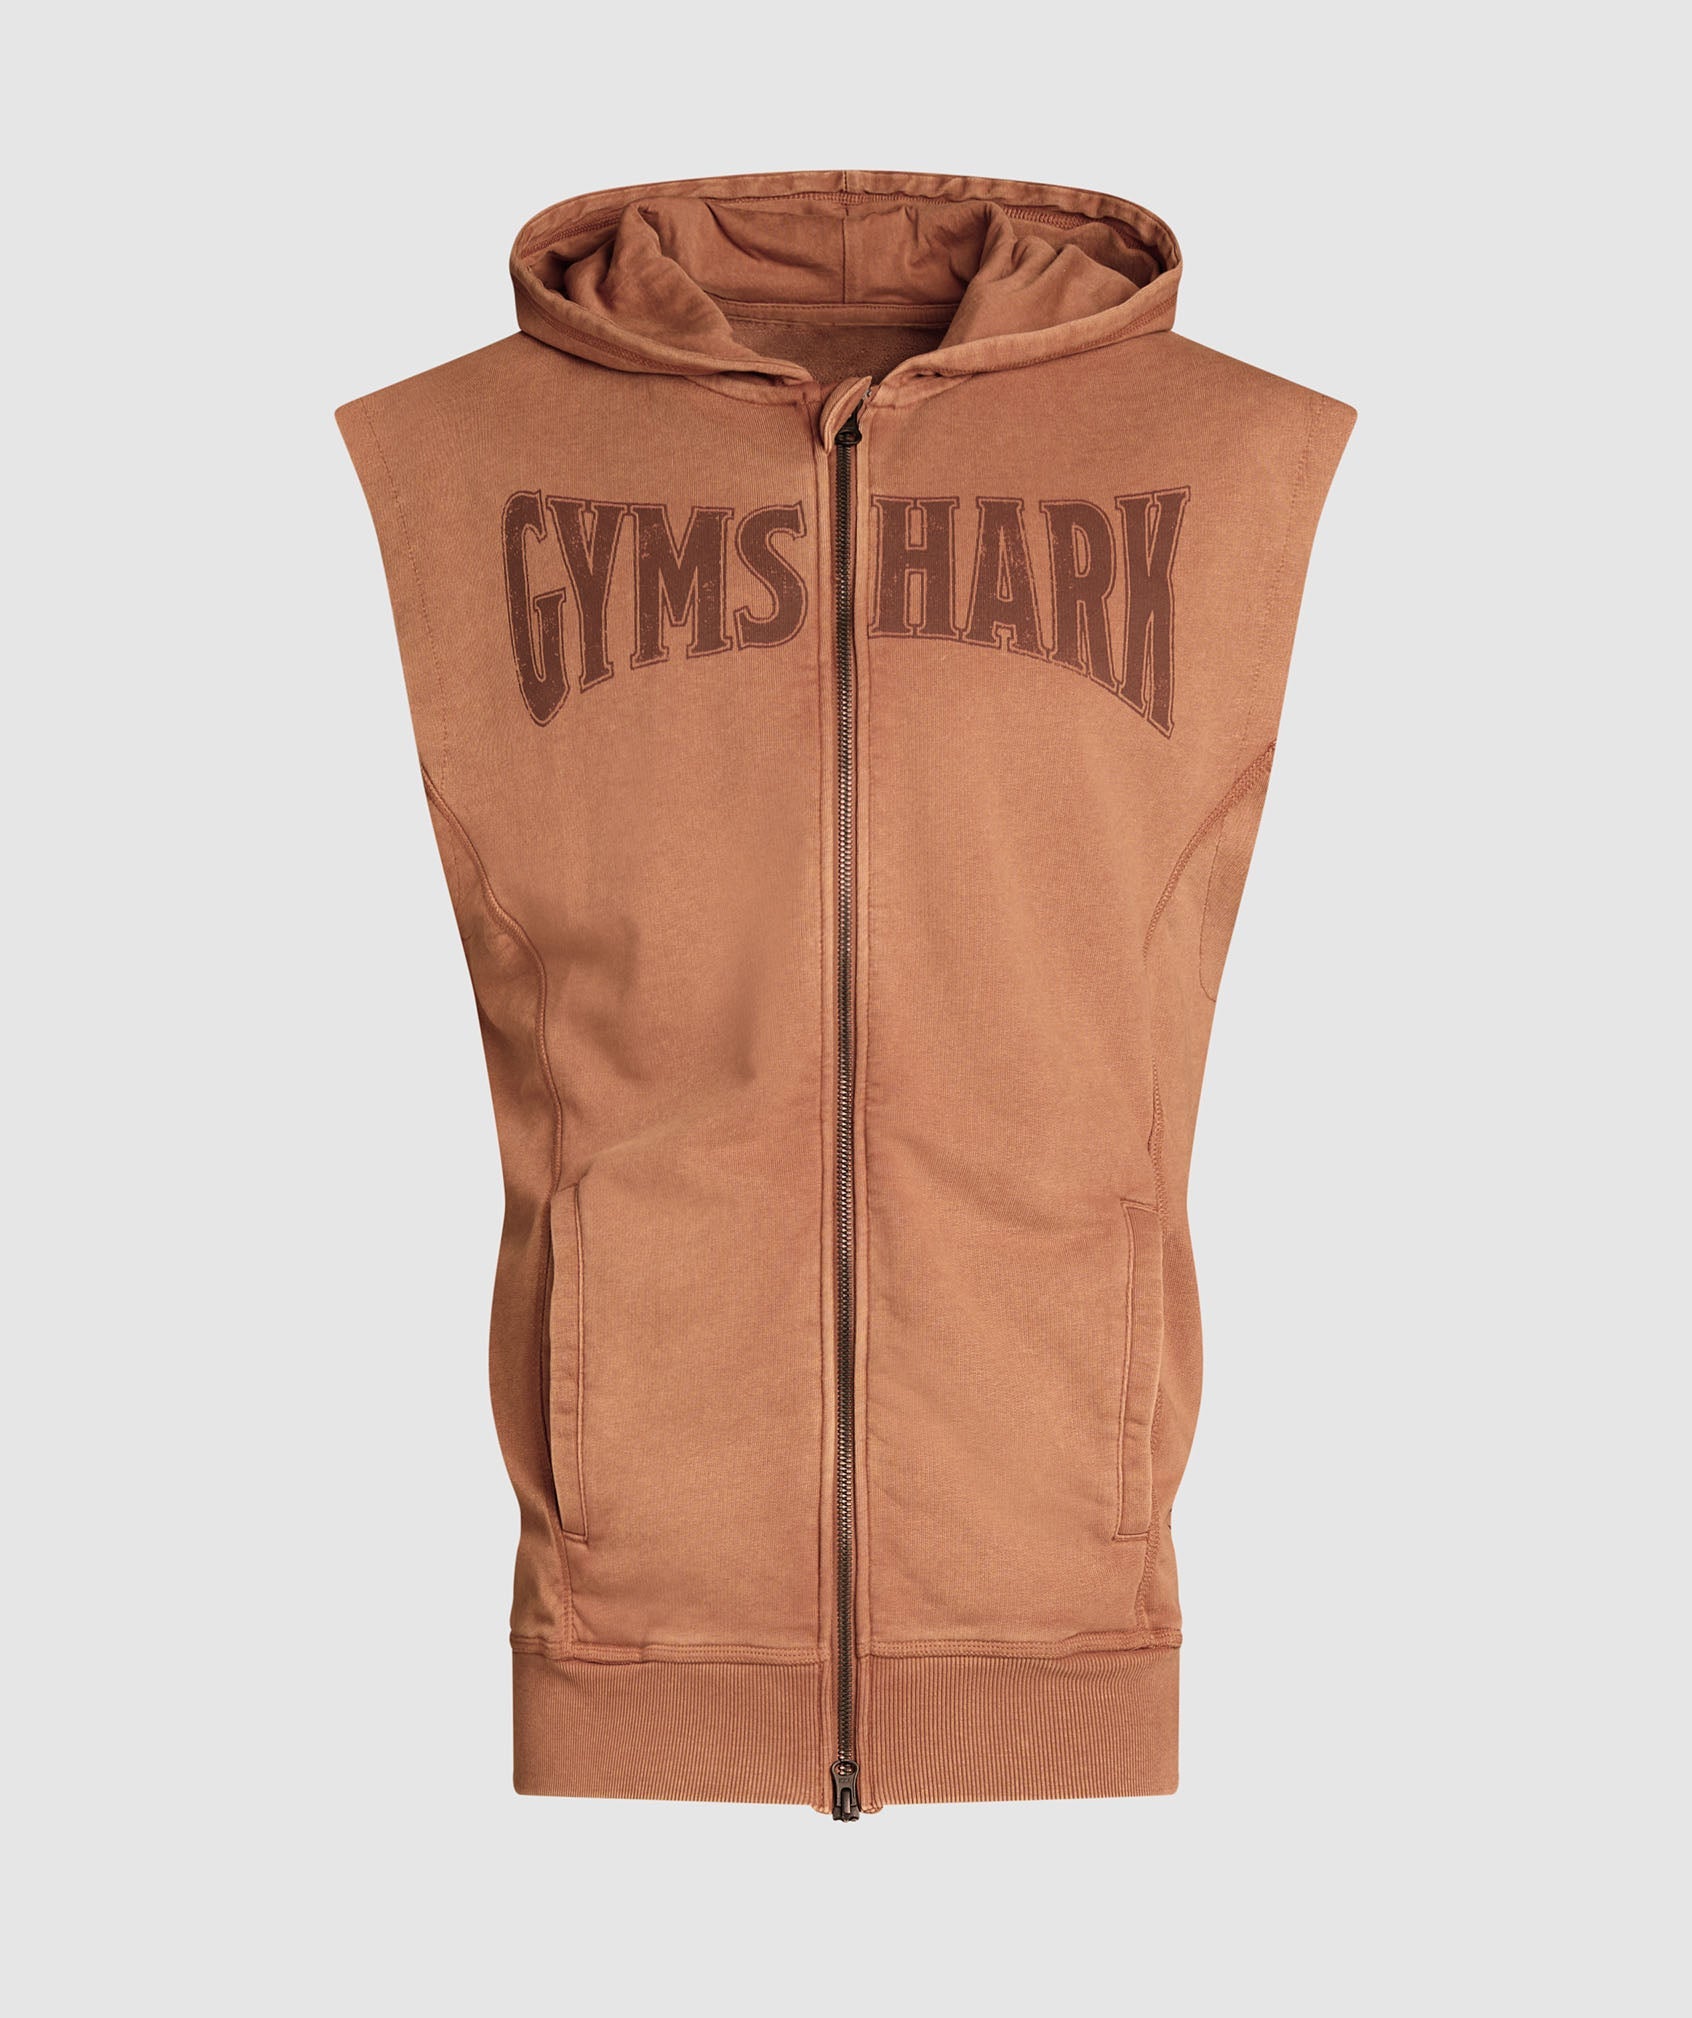 Heritage Washed Sleeveless Zip Up Hoodie in Canyon Brown - view 8